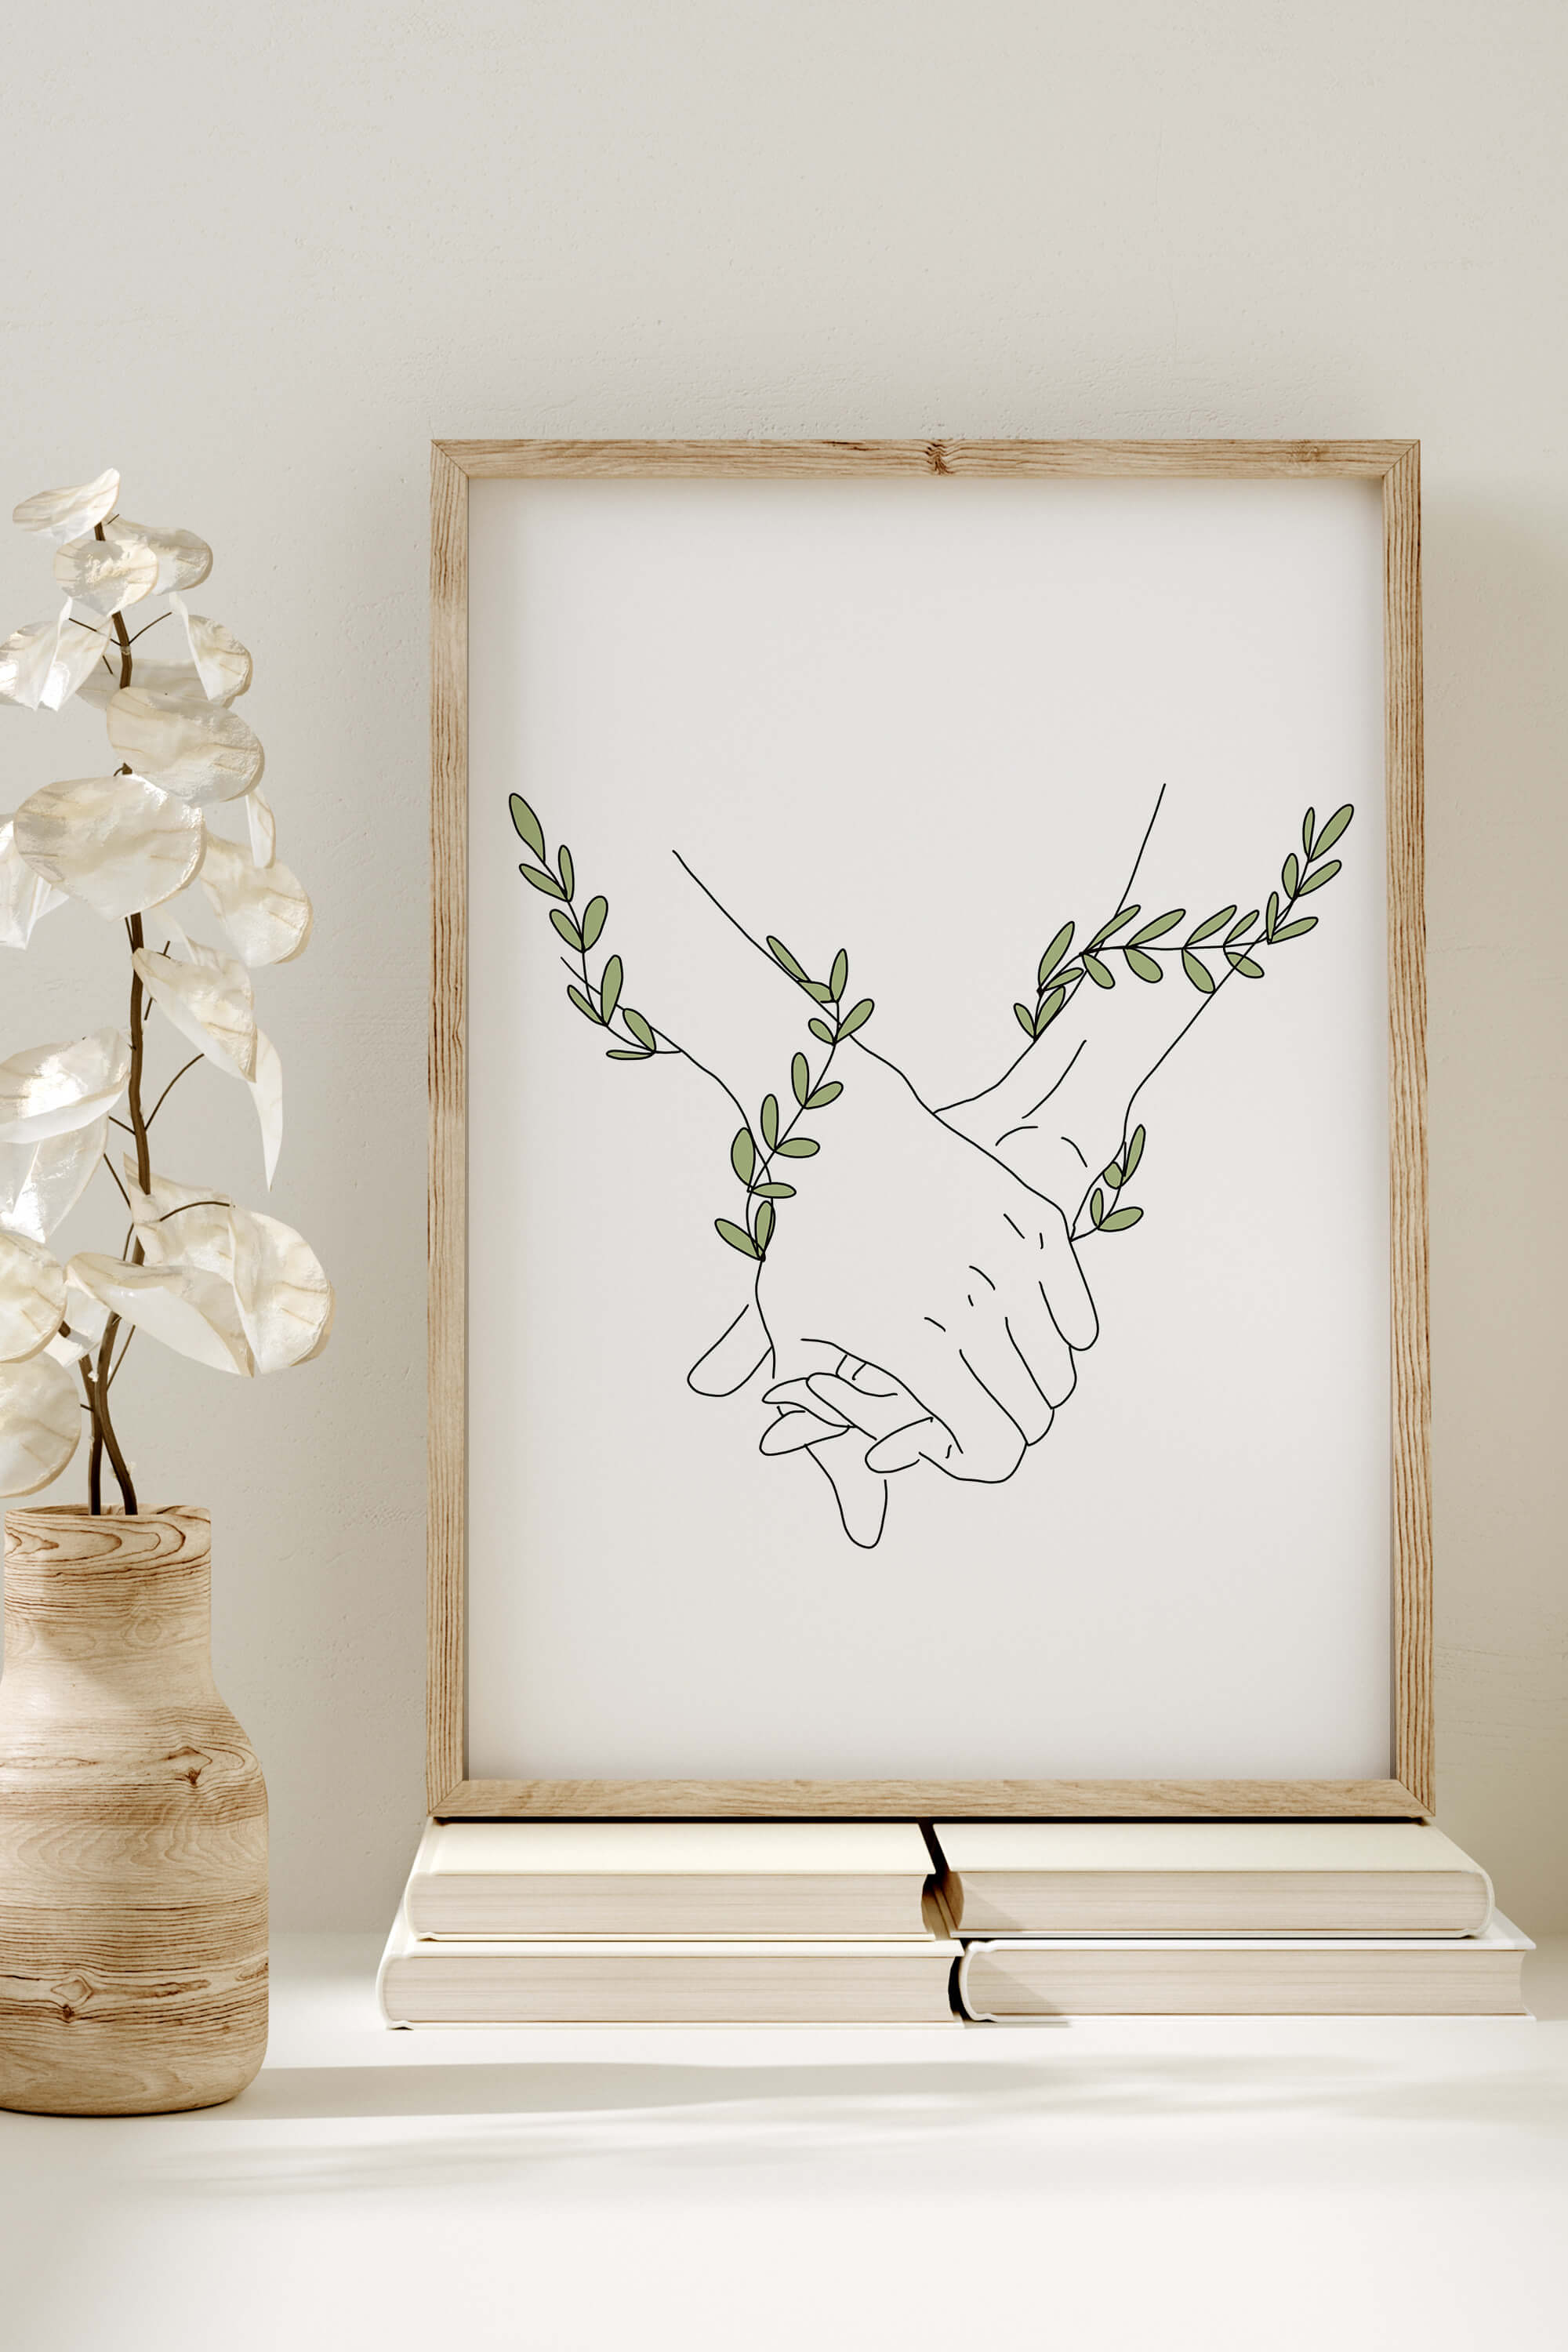 A nature-inspired couple art print, celebrating the connection between two souls.